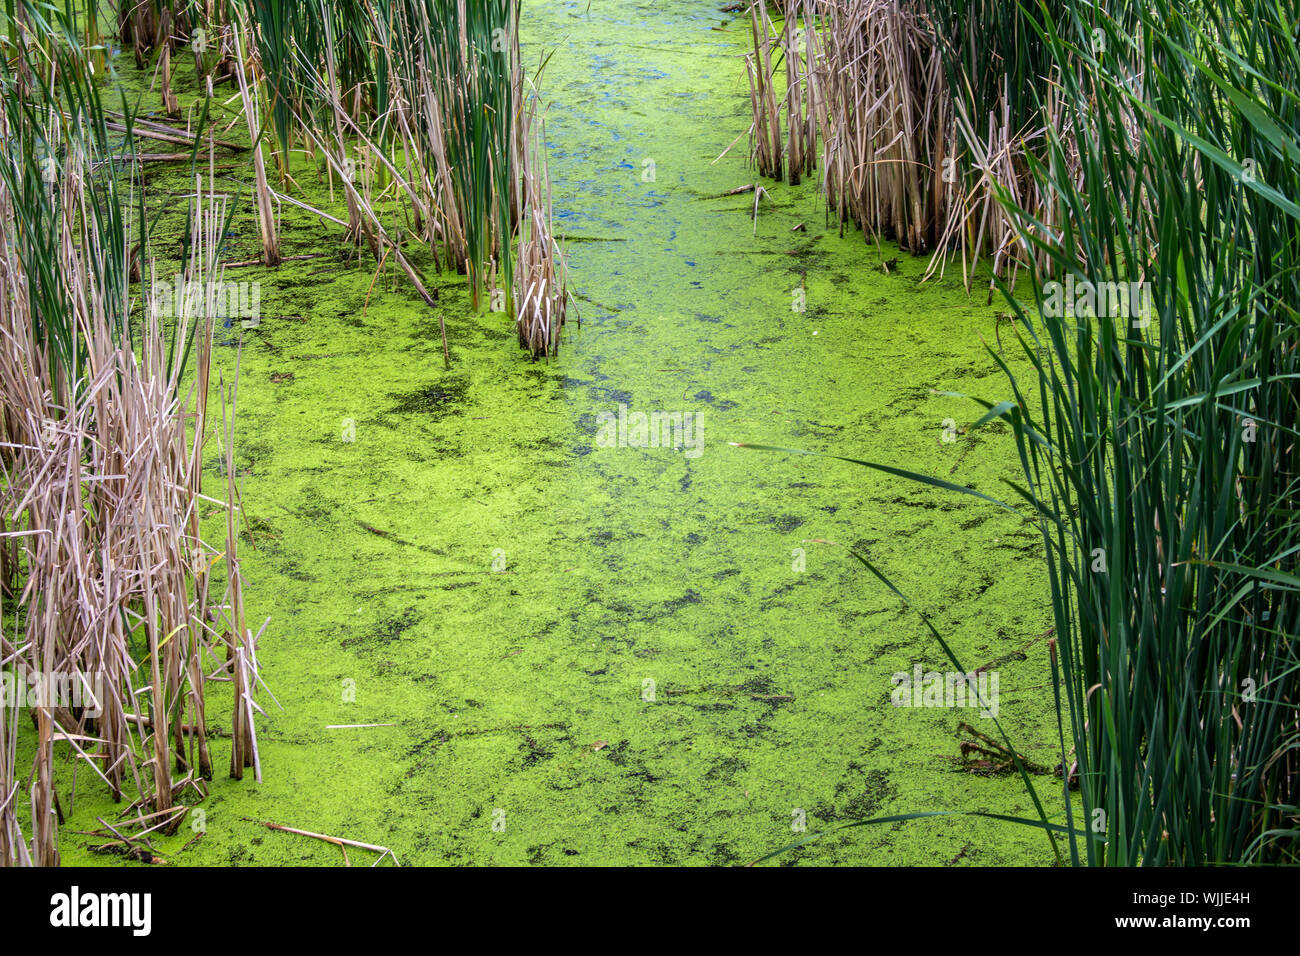 Bright green algae covers the surface of water in swampy wetlands, surrounded by grasses and reeds. Stock Photo